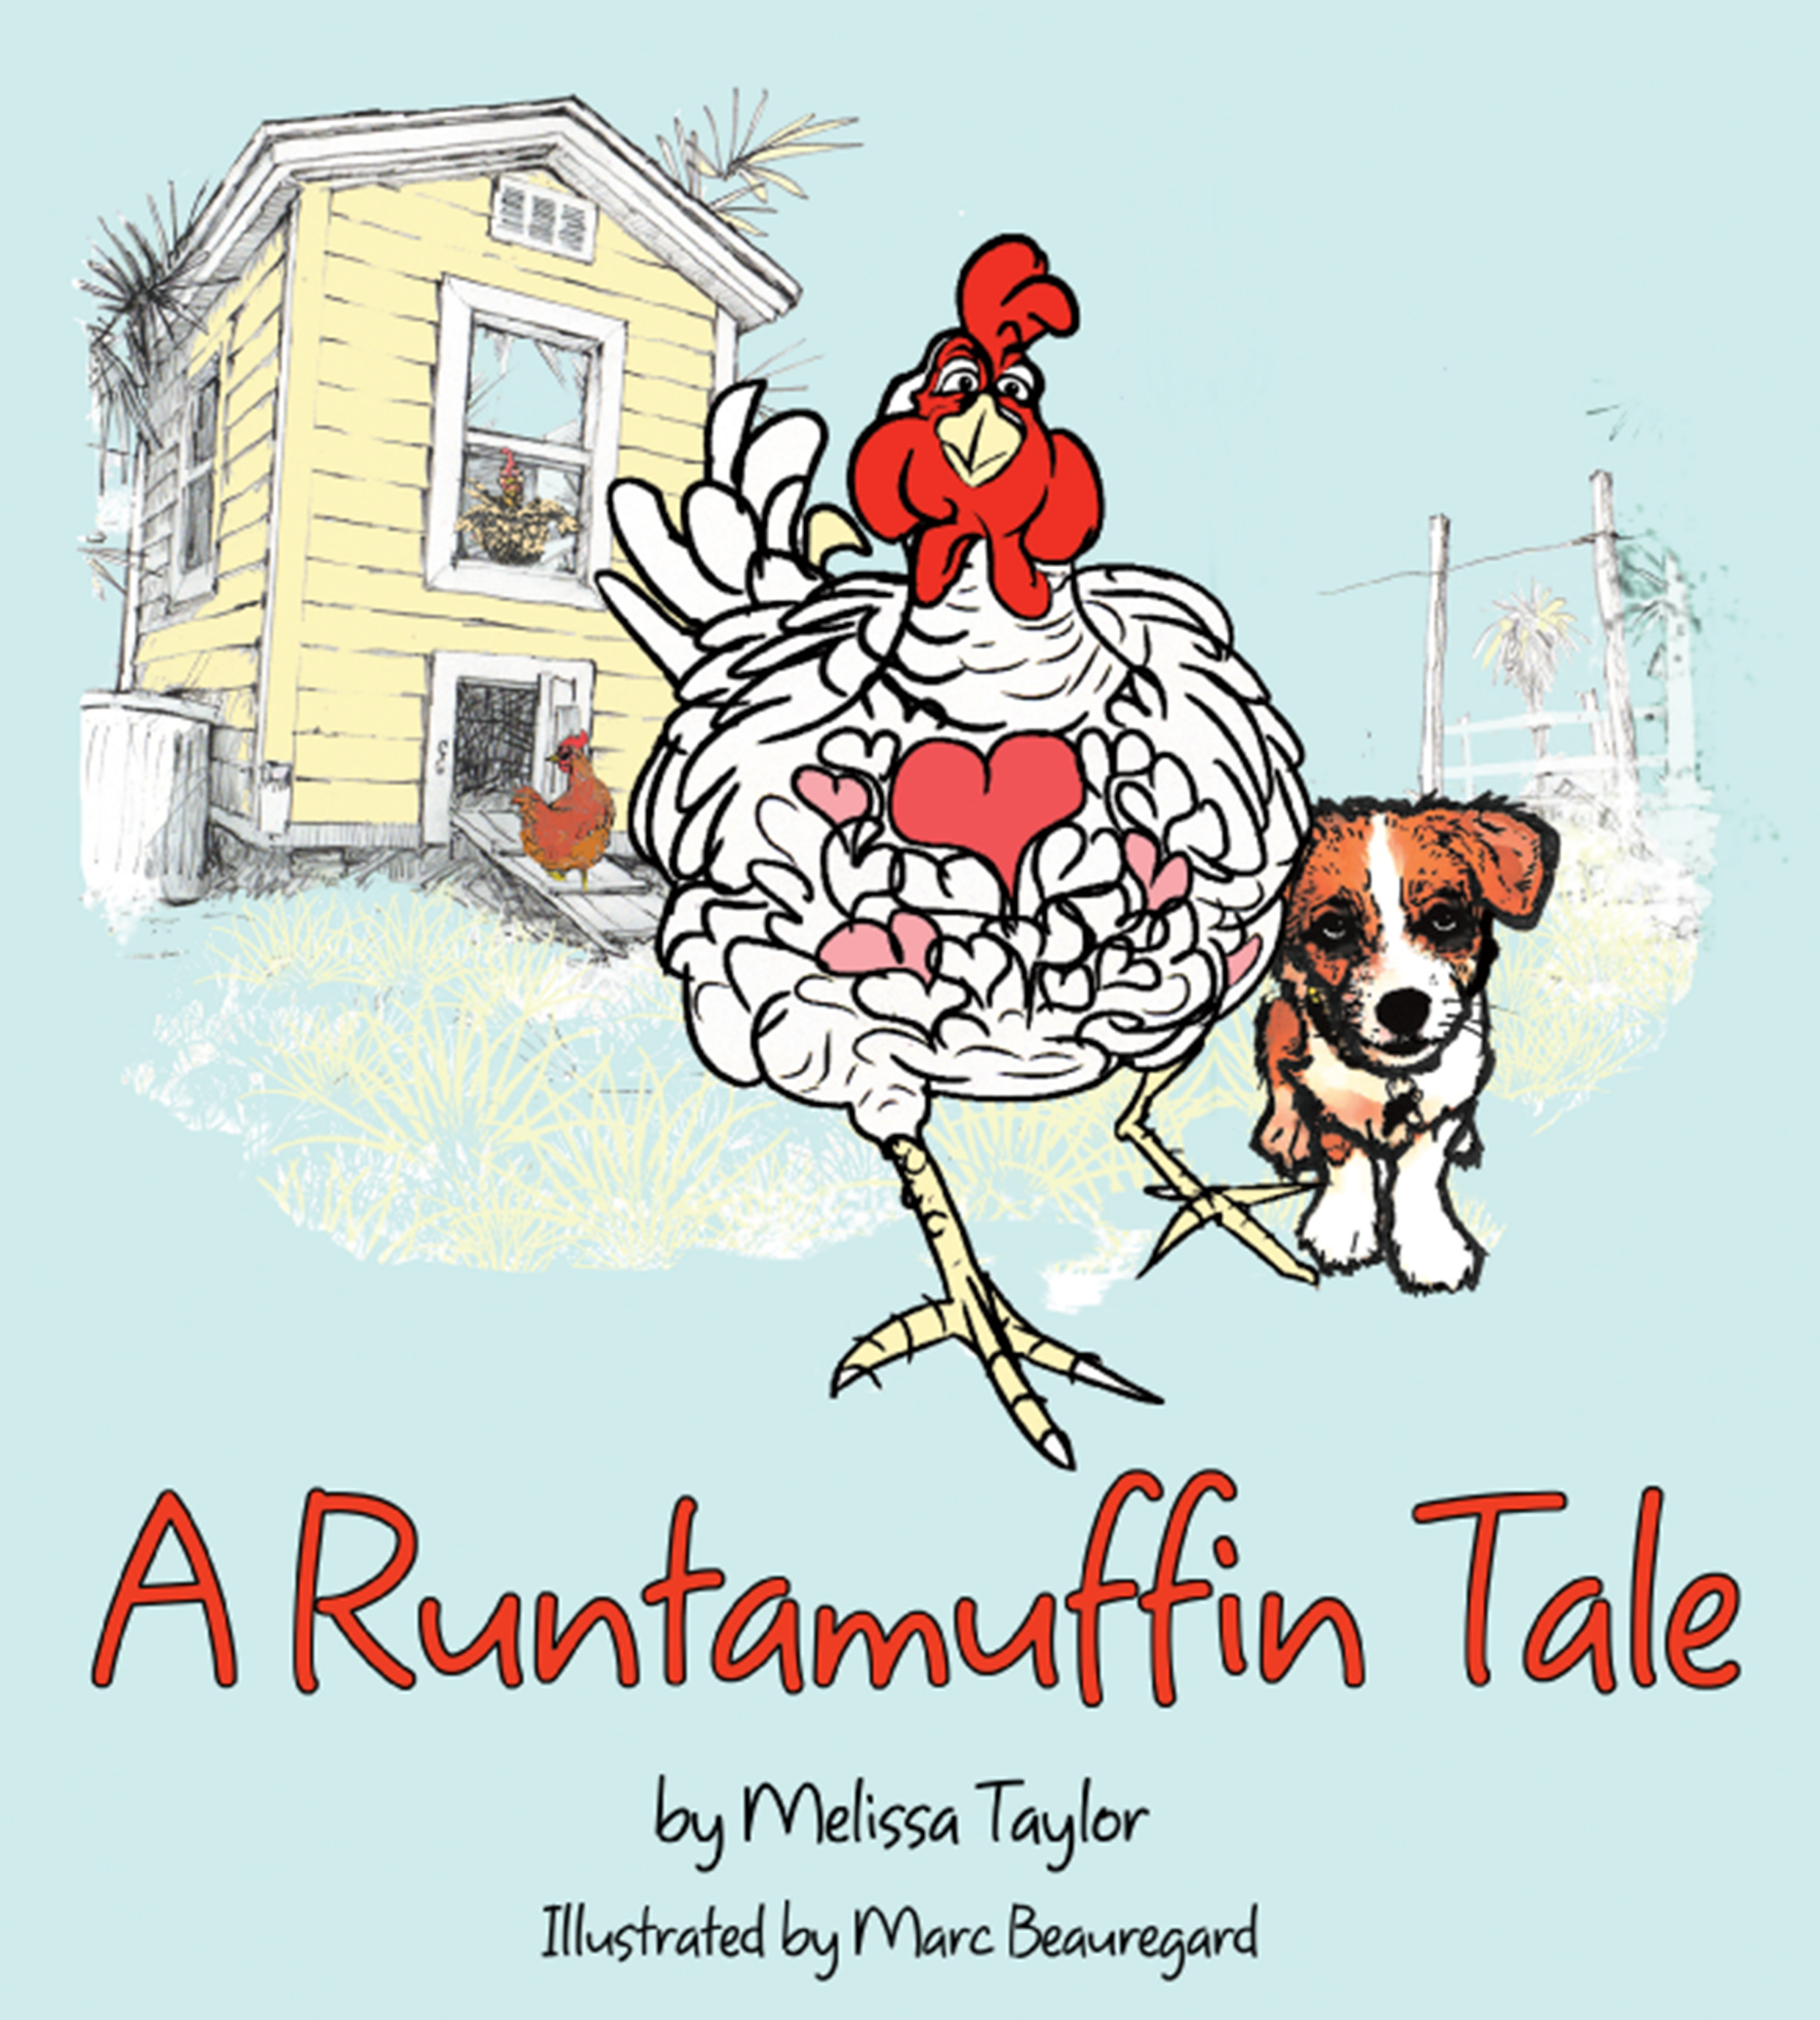 A Runtamuffin Tale by Melissa Taylor Book Review